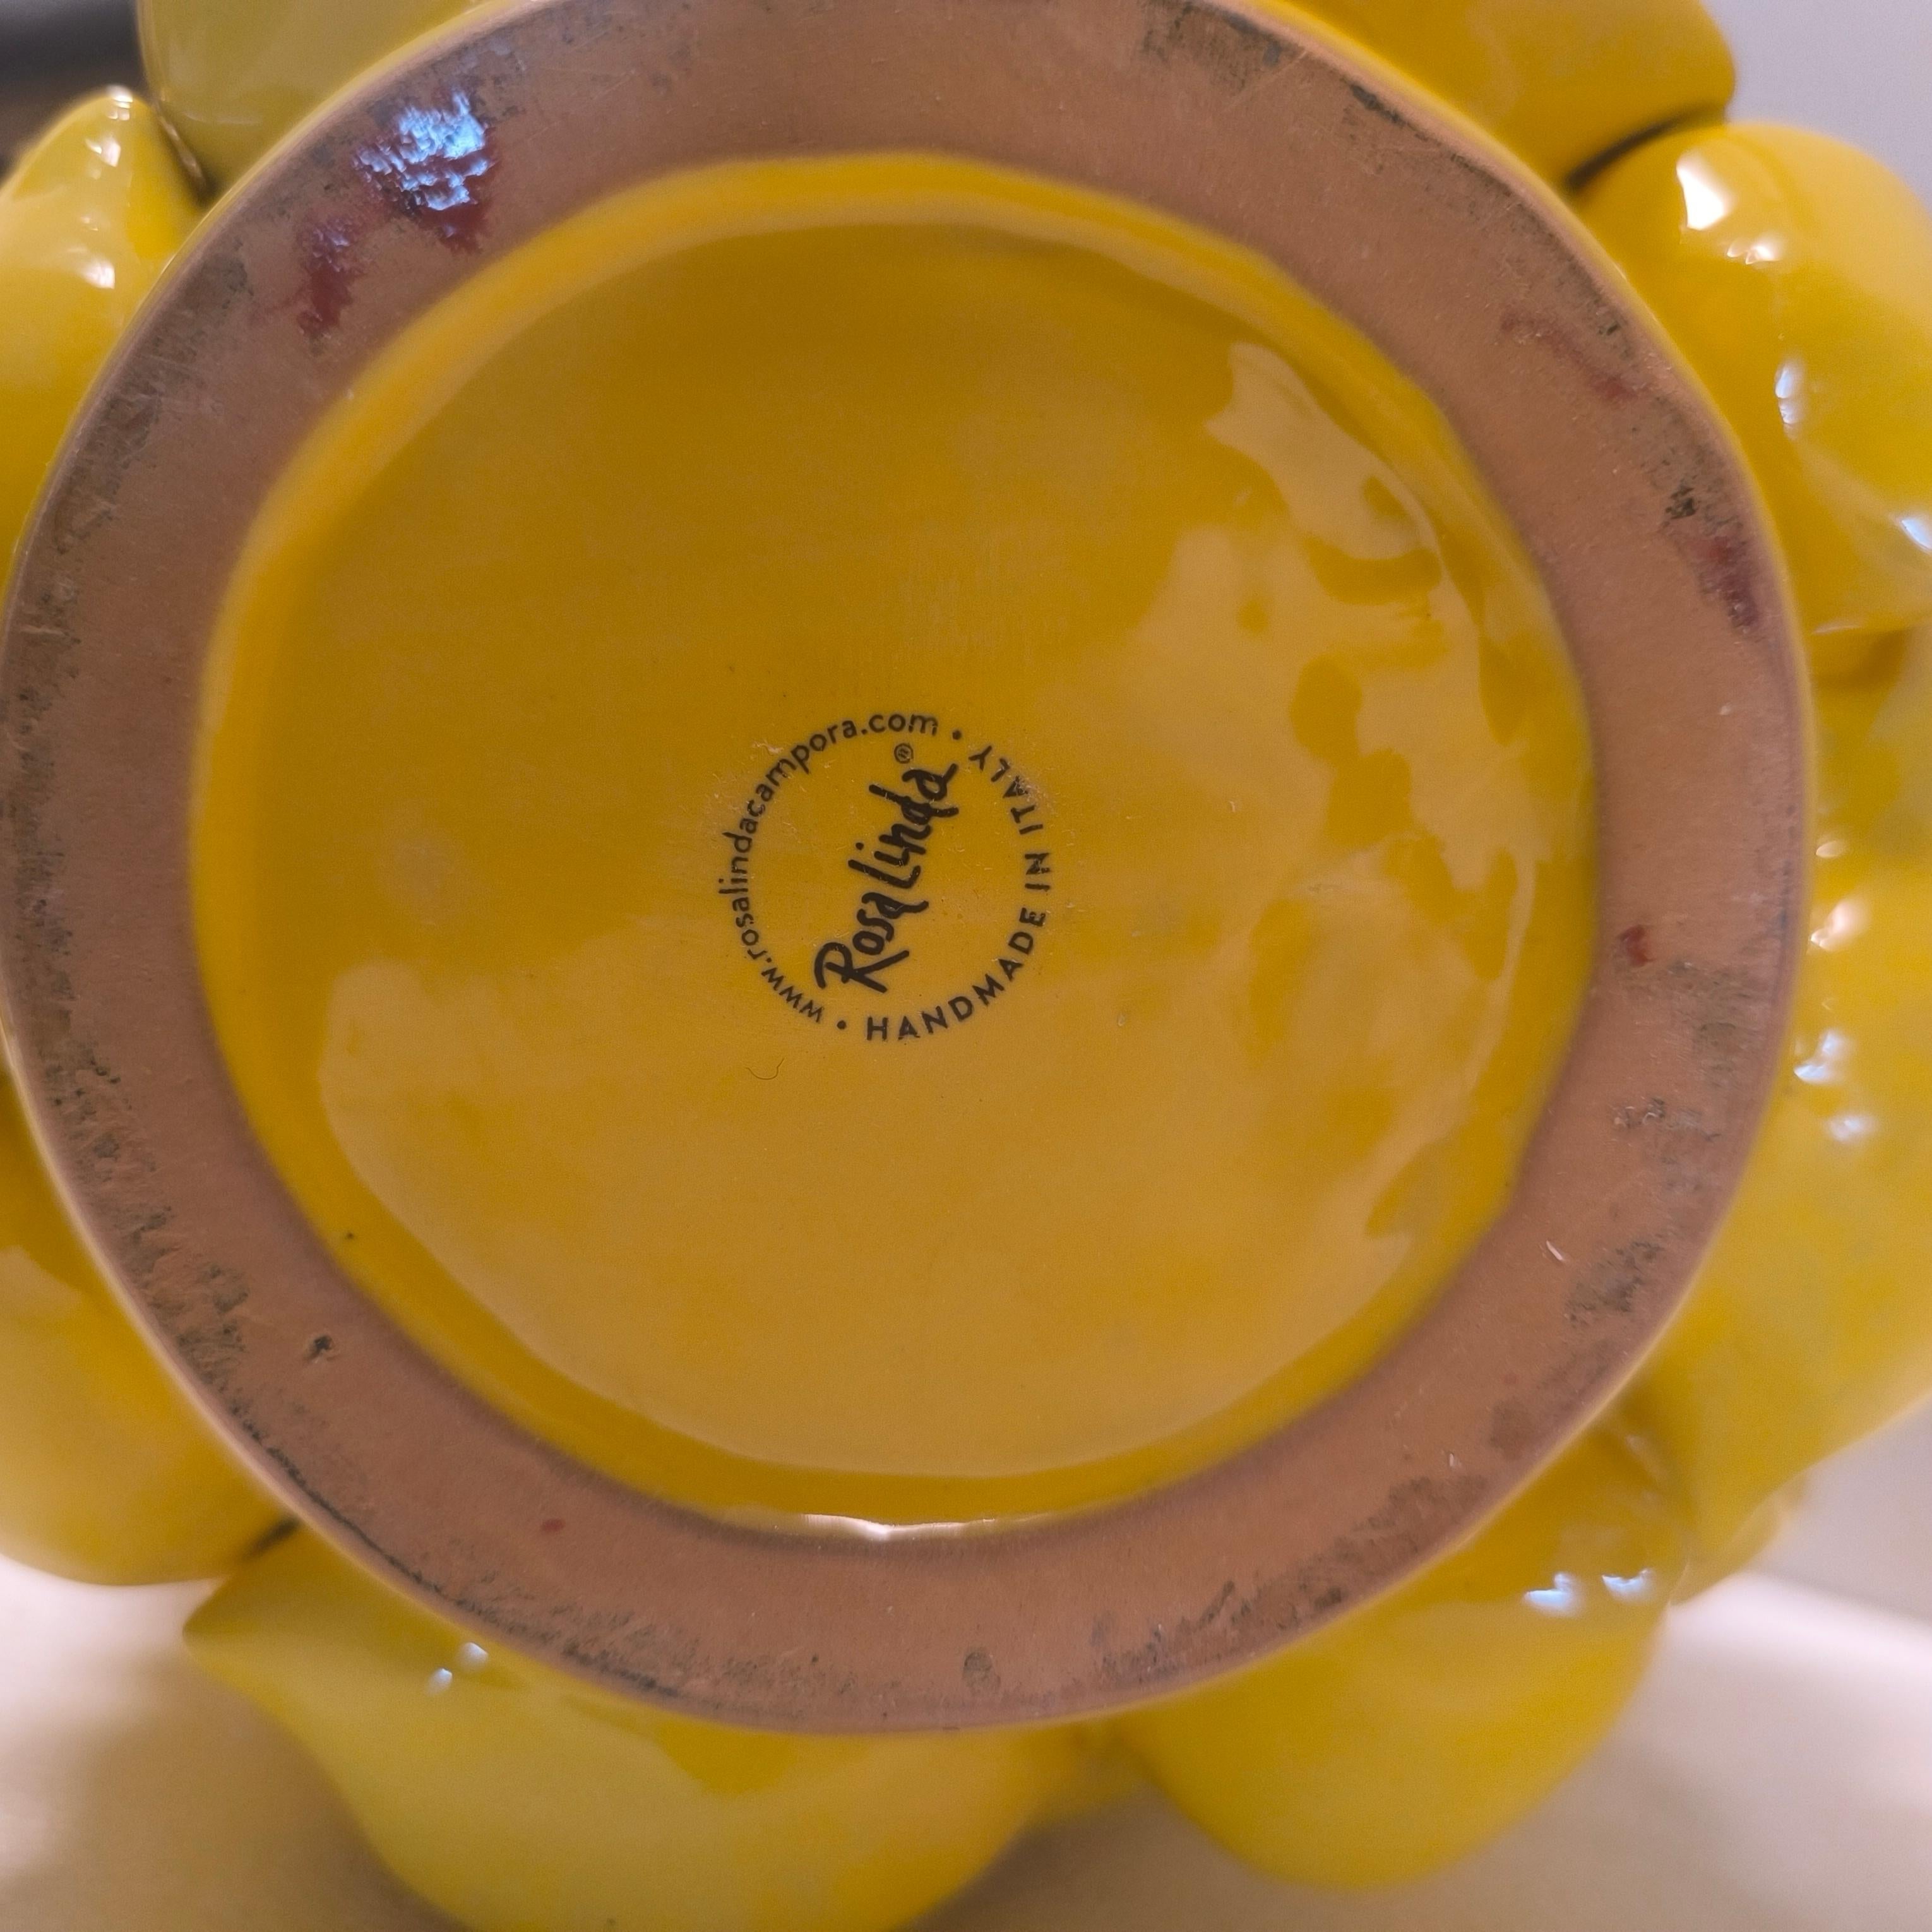 Pair of Italy  lemon vases, Yellow glazed ceramic, R. Acampora, Limited Edition For Sale 6